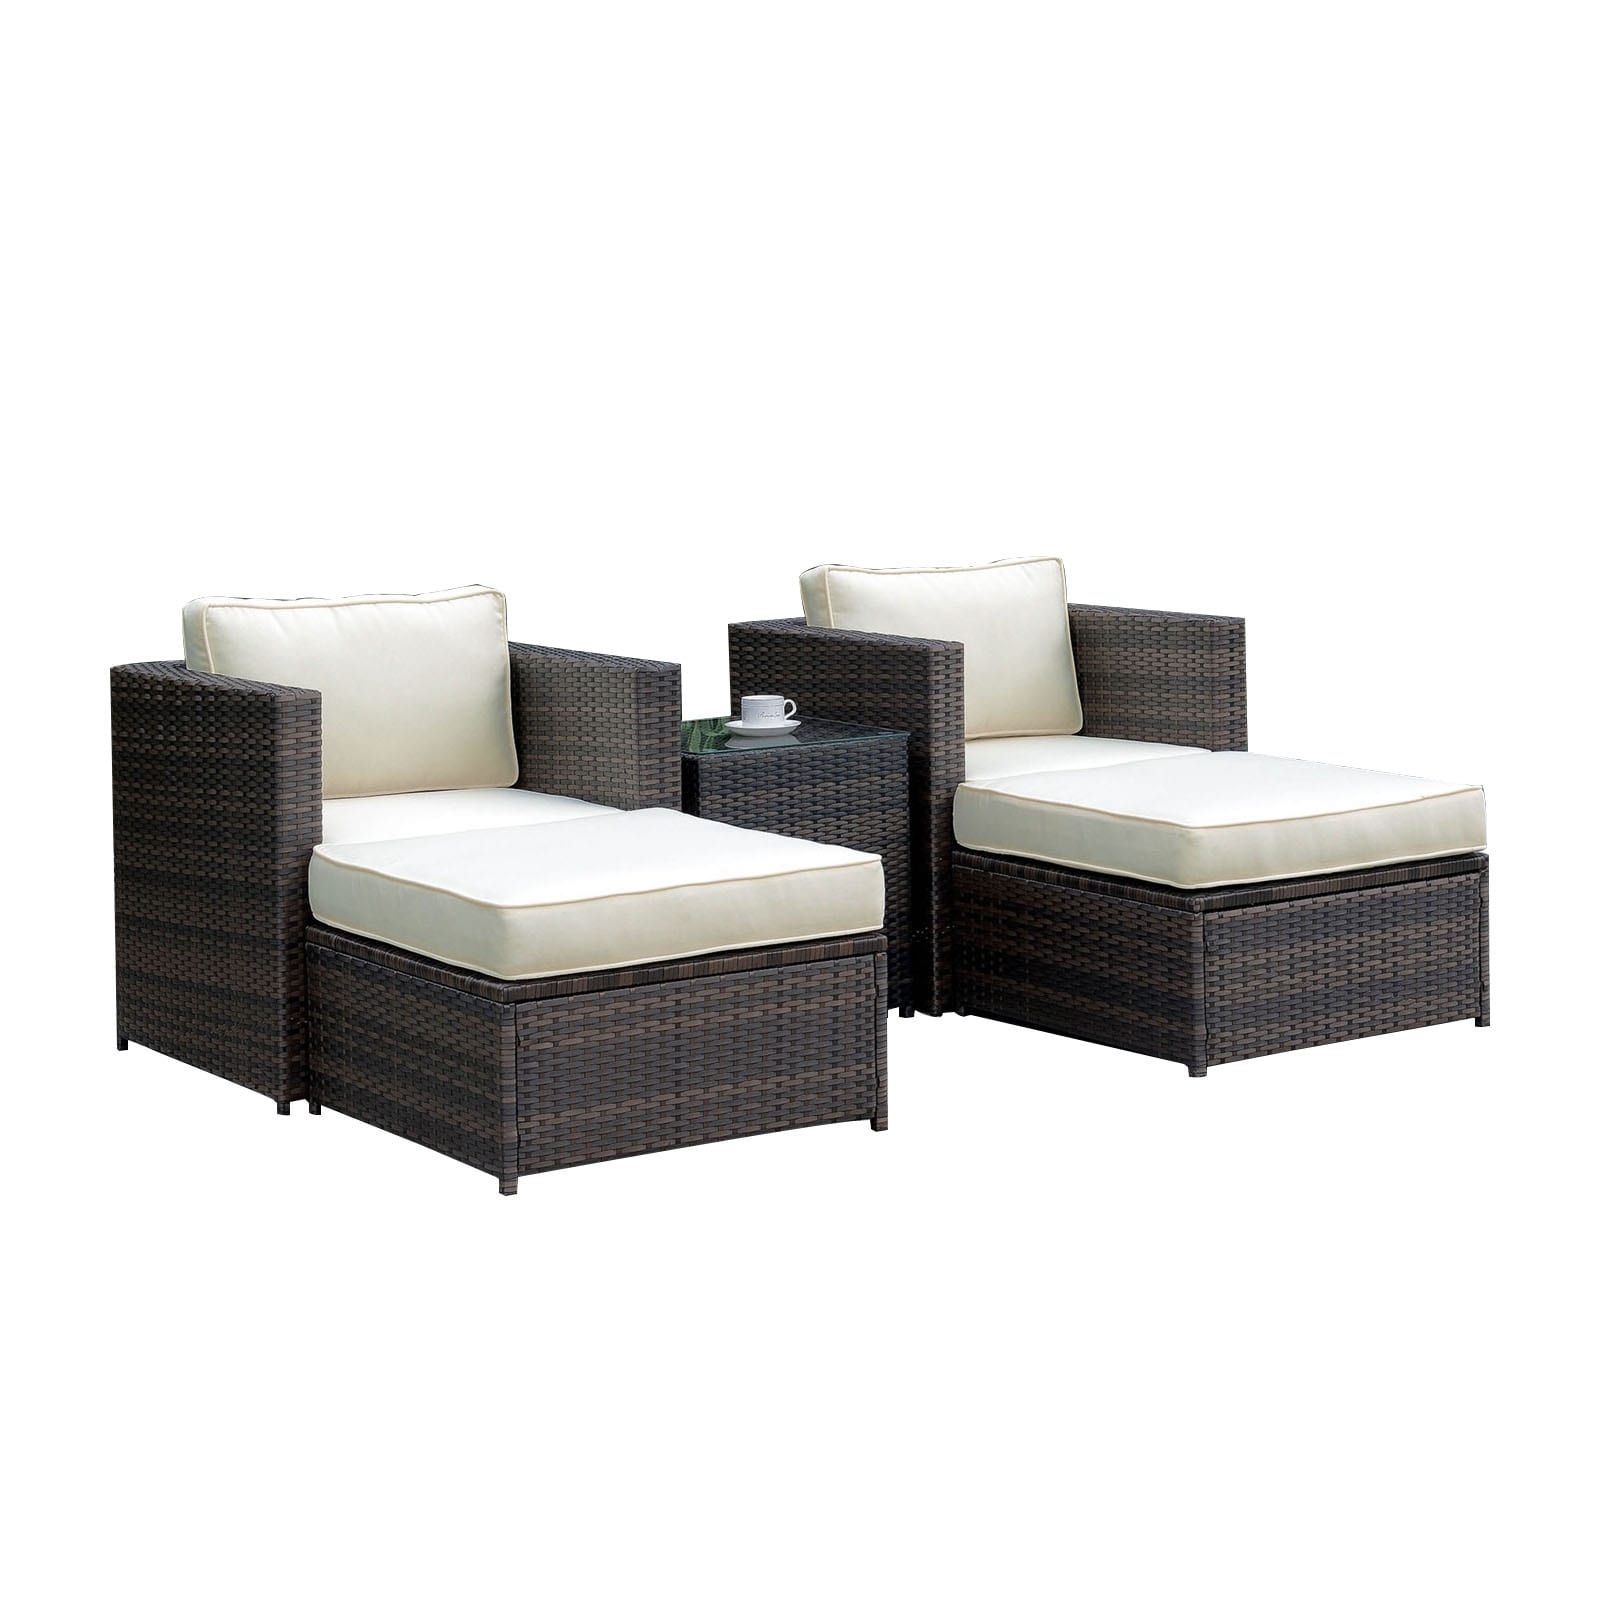 Patio Sectional With Ottoman In Brown And Beige